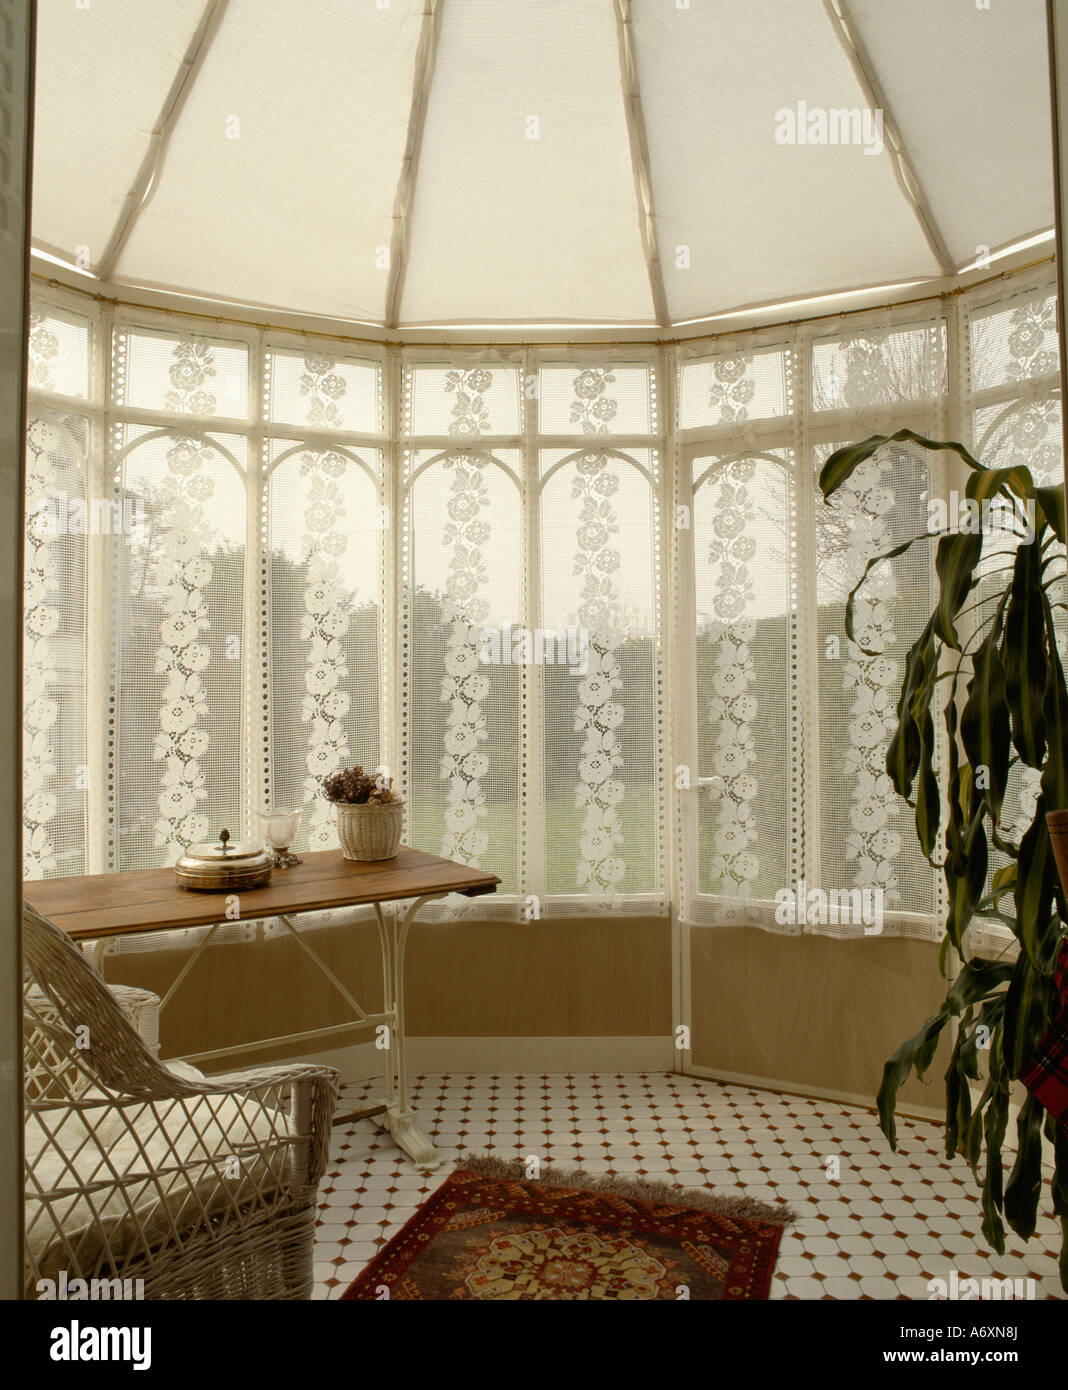 White blinds on ceiling in small conservatory with lace drapes on windows Stock Photo